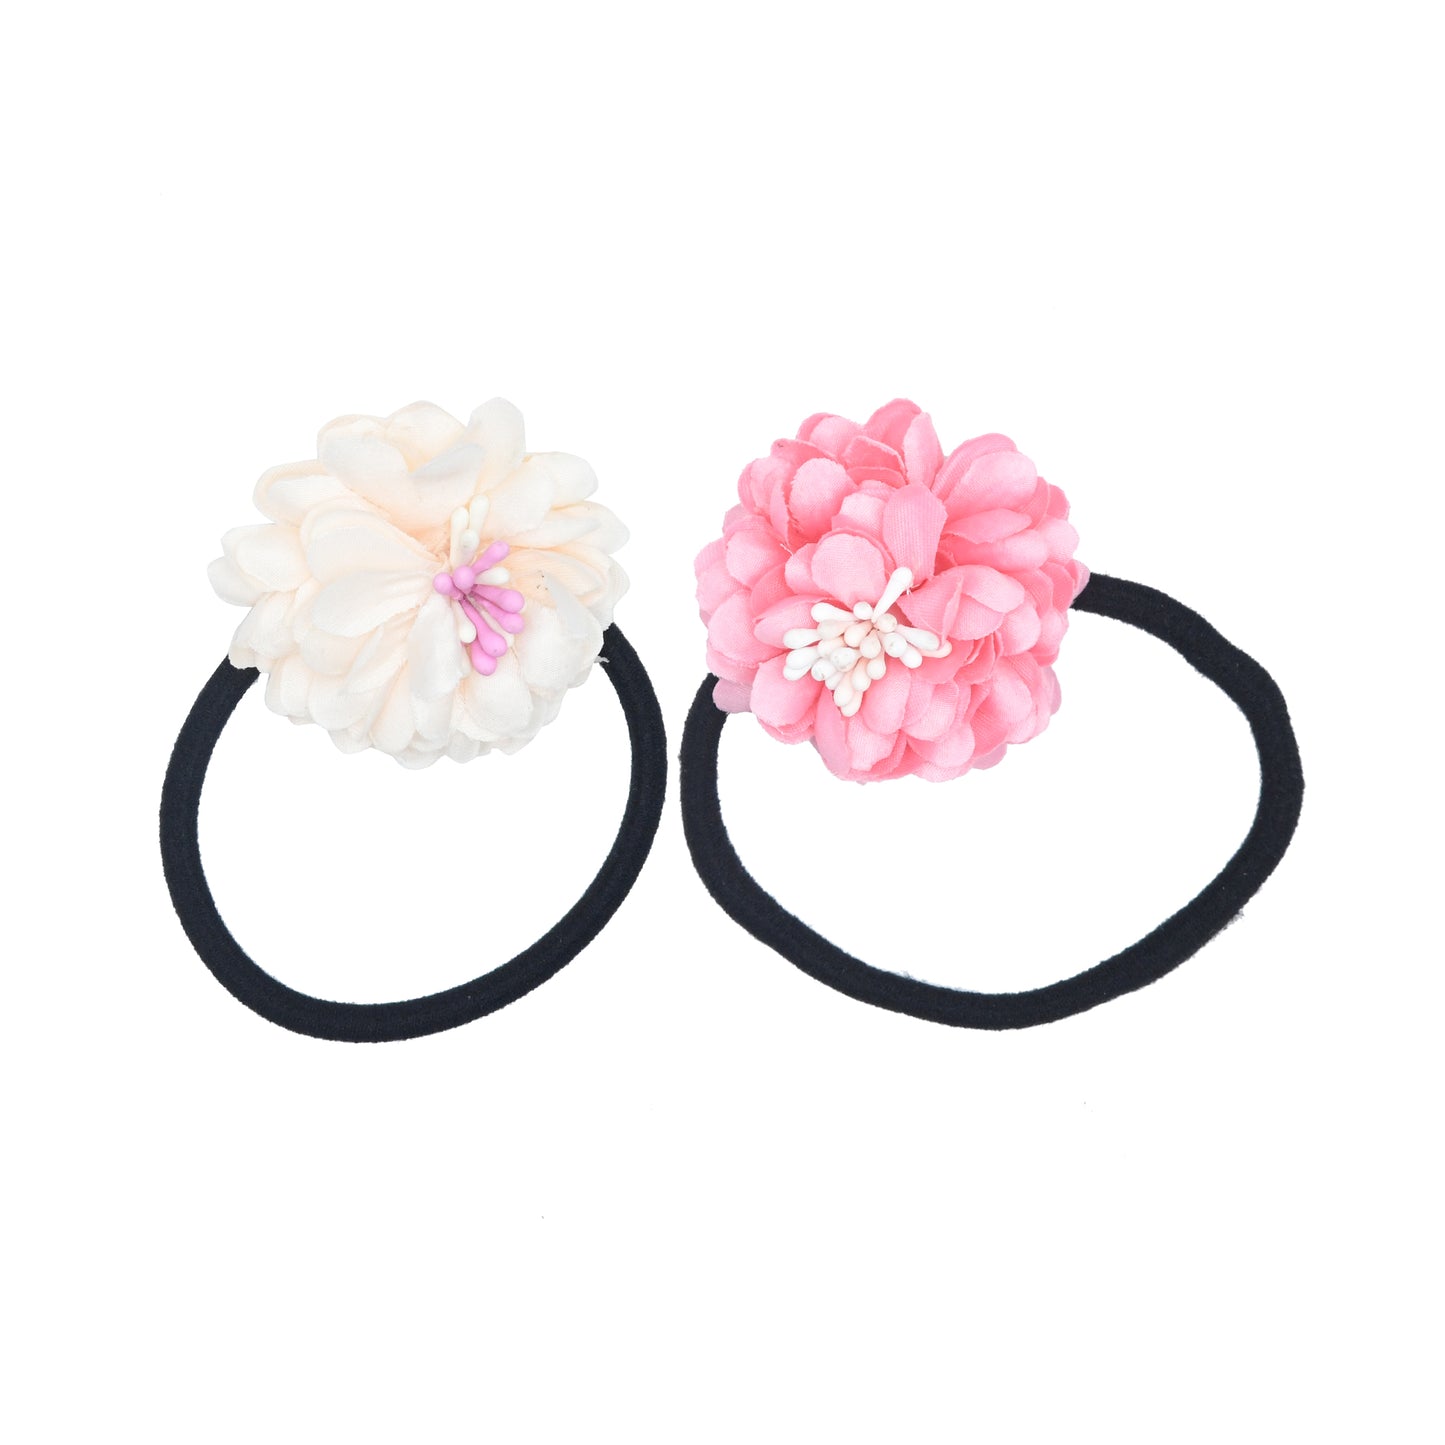 Pink & White Hair Ties for Girls (Set of 2)